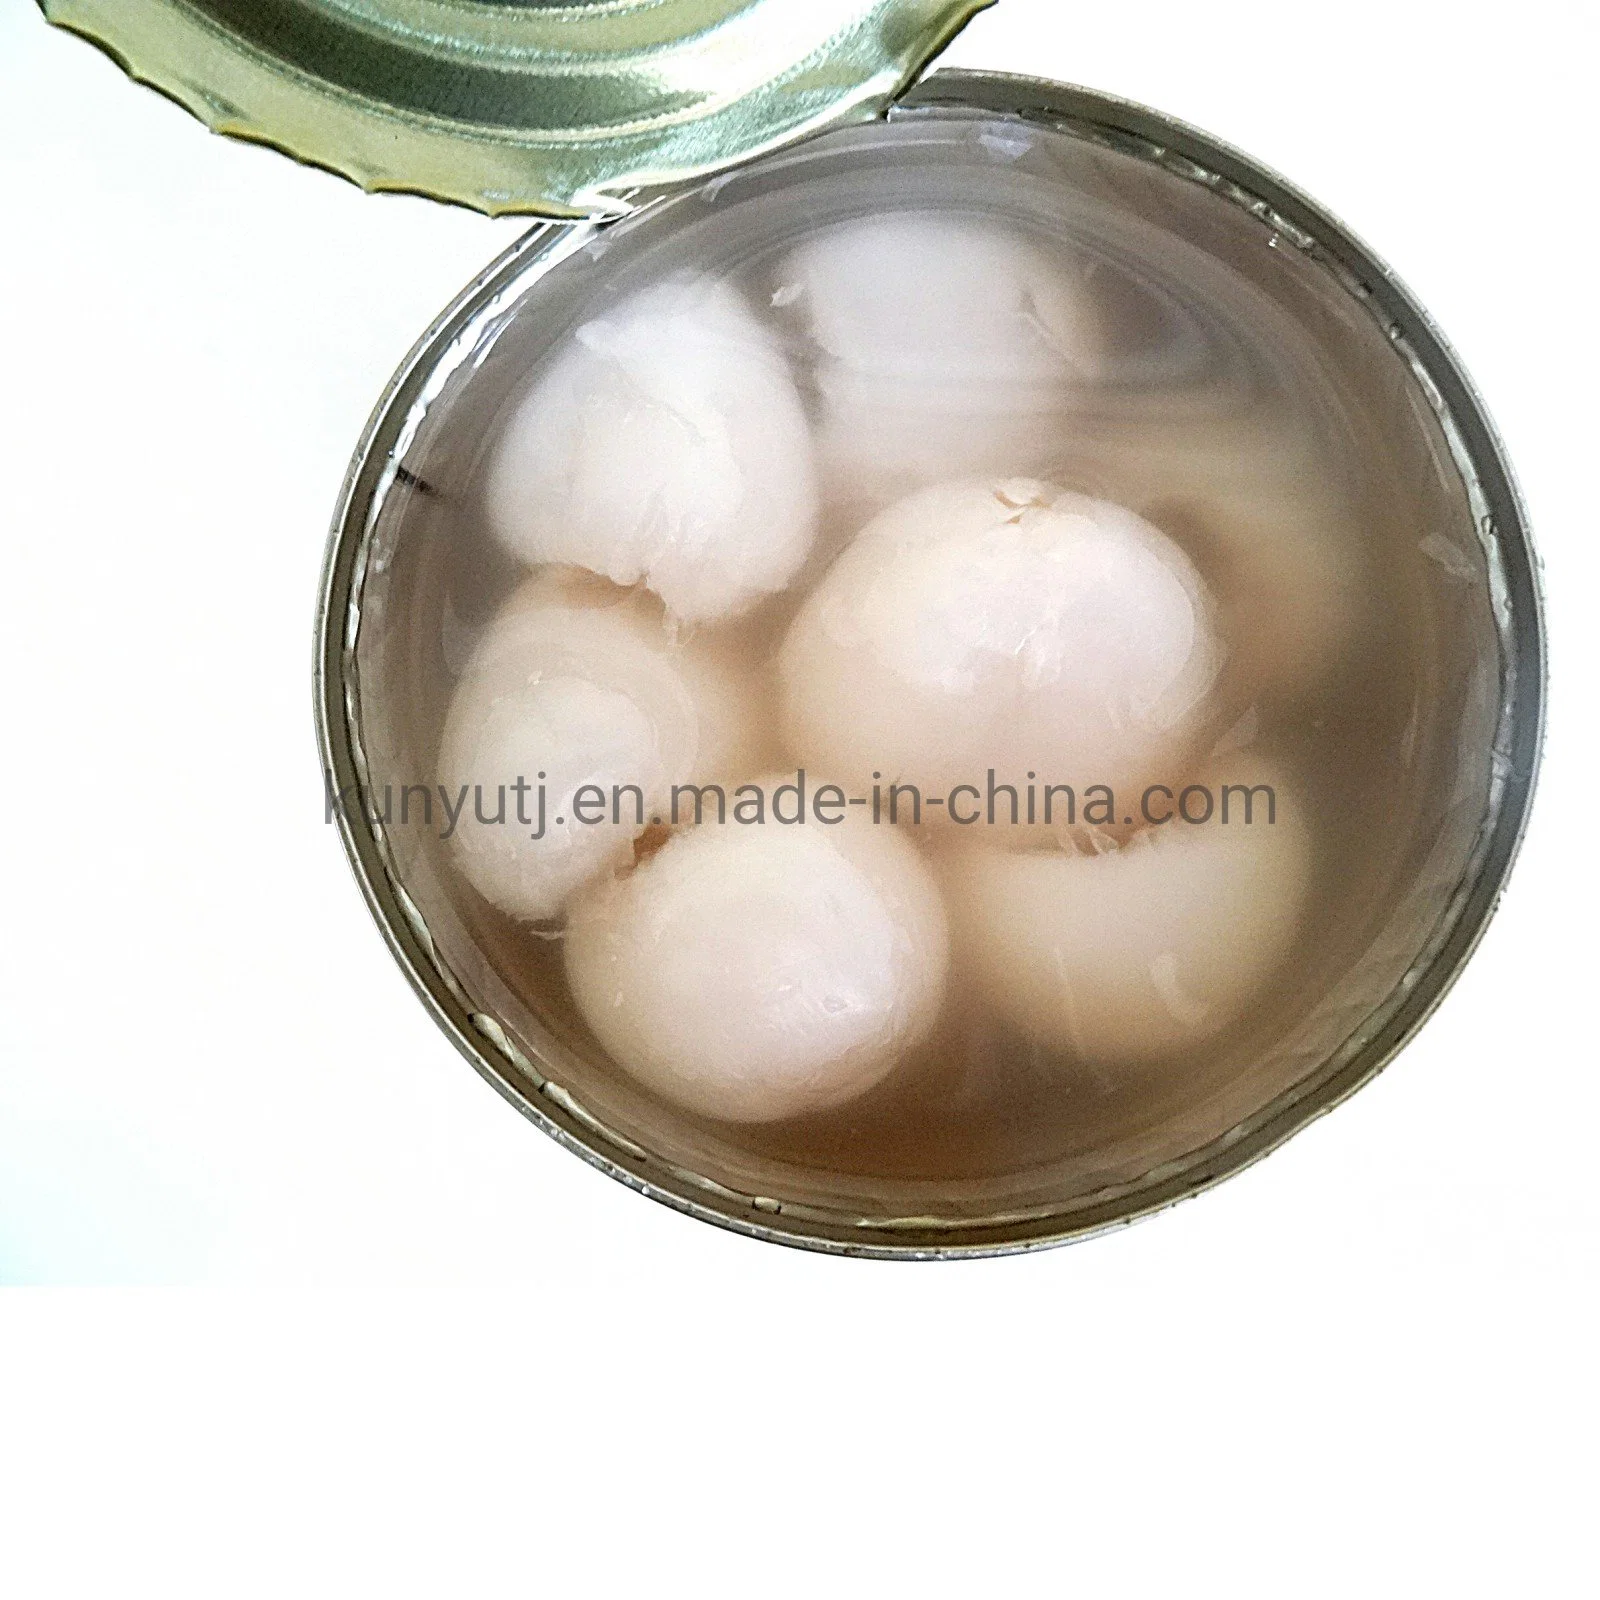 New Crop Chinese Canned Fruit Canned Lychees Whole in Light Syrup